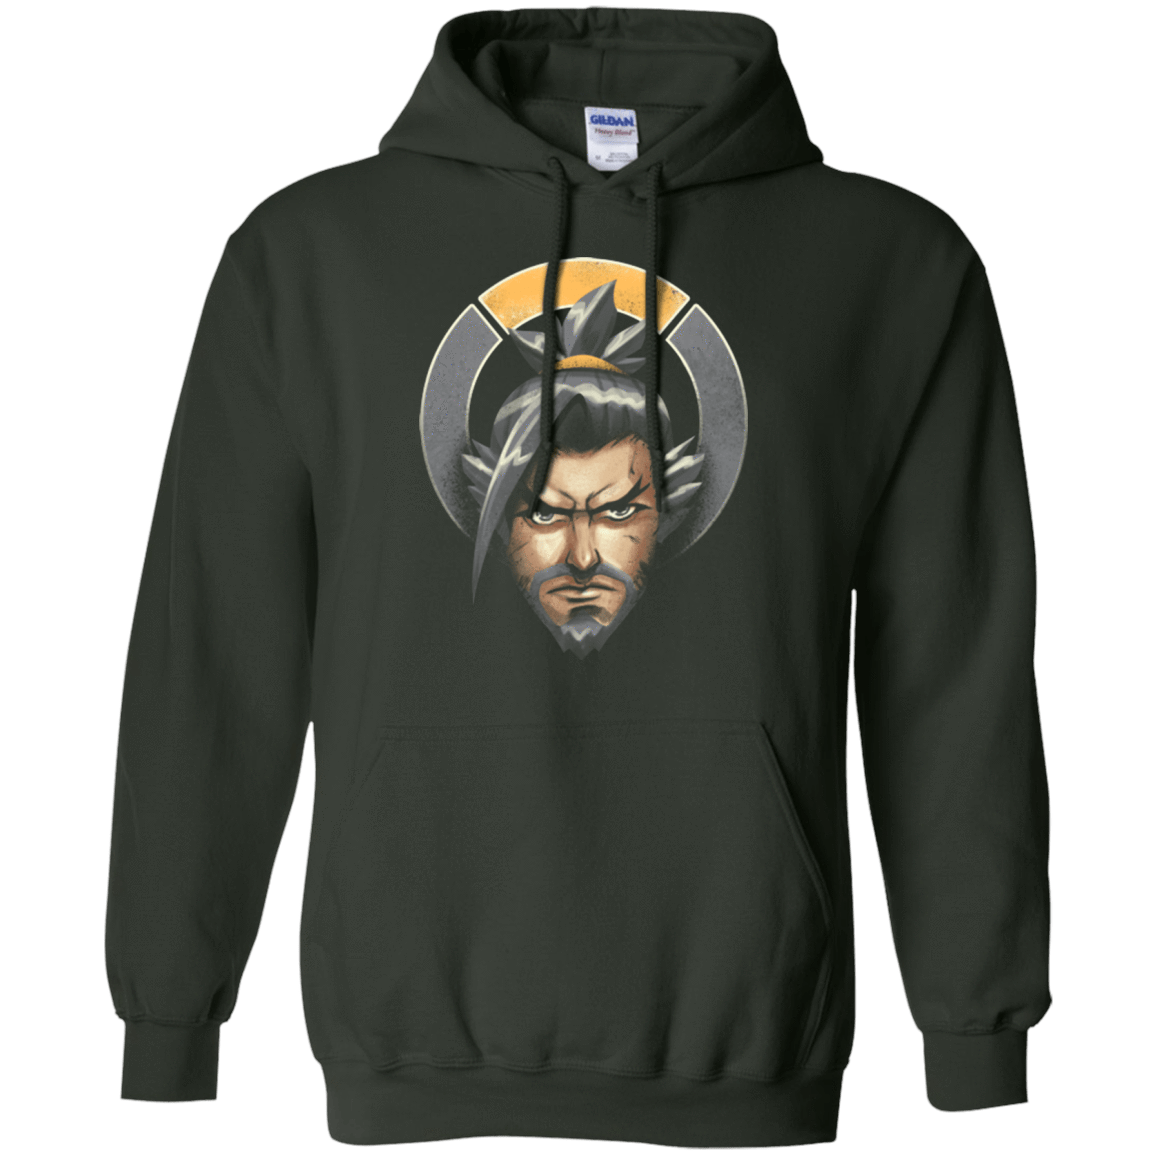 Sweatshirts Forest Green / Small The Bowman Assassin Pullover Hoodie